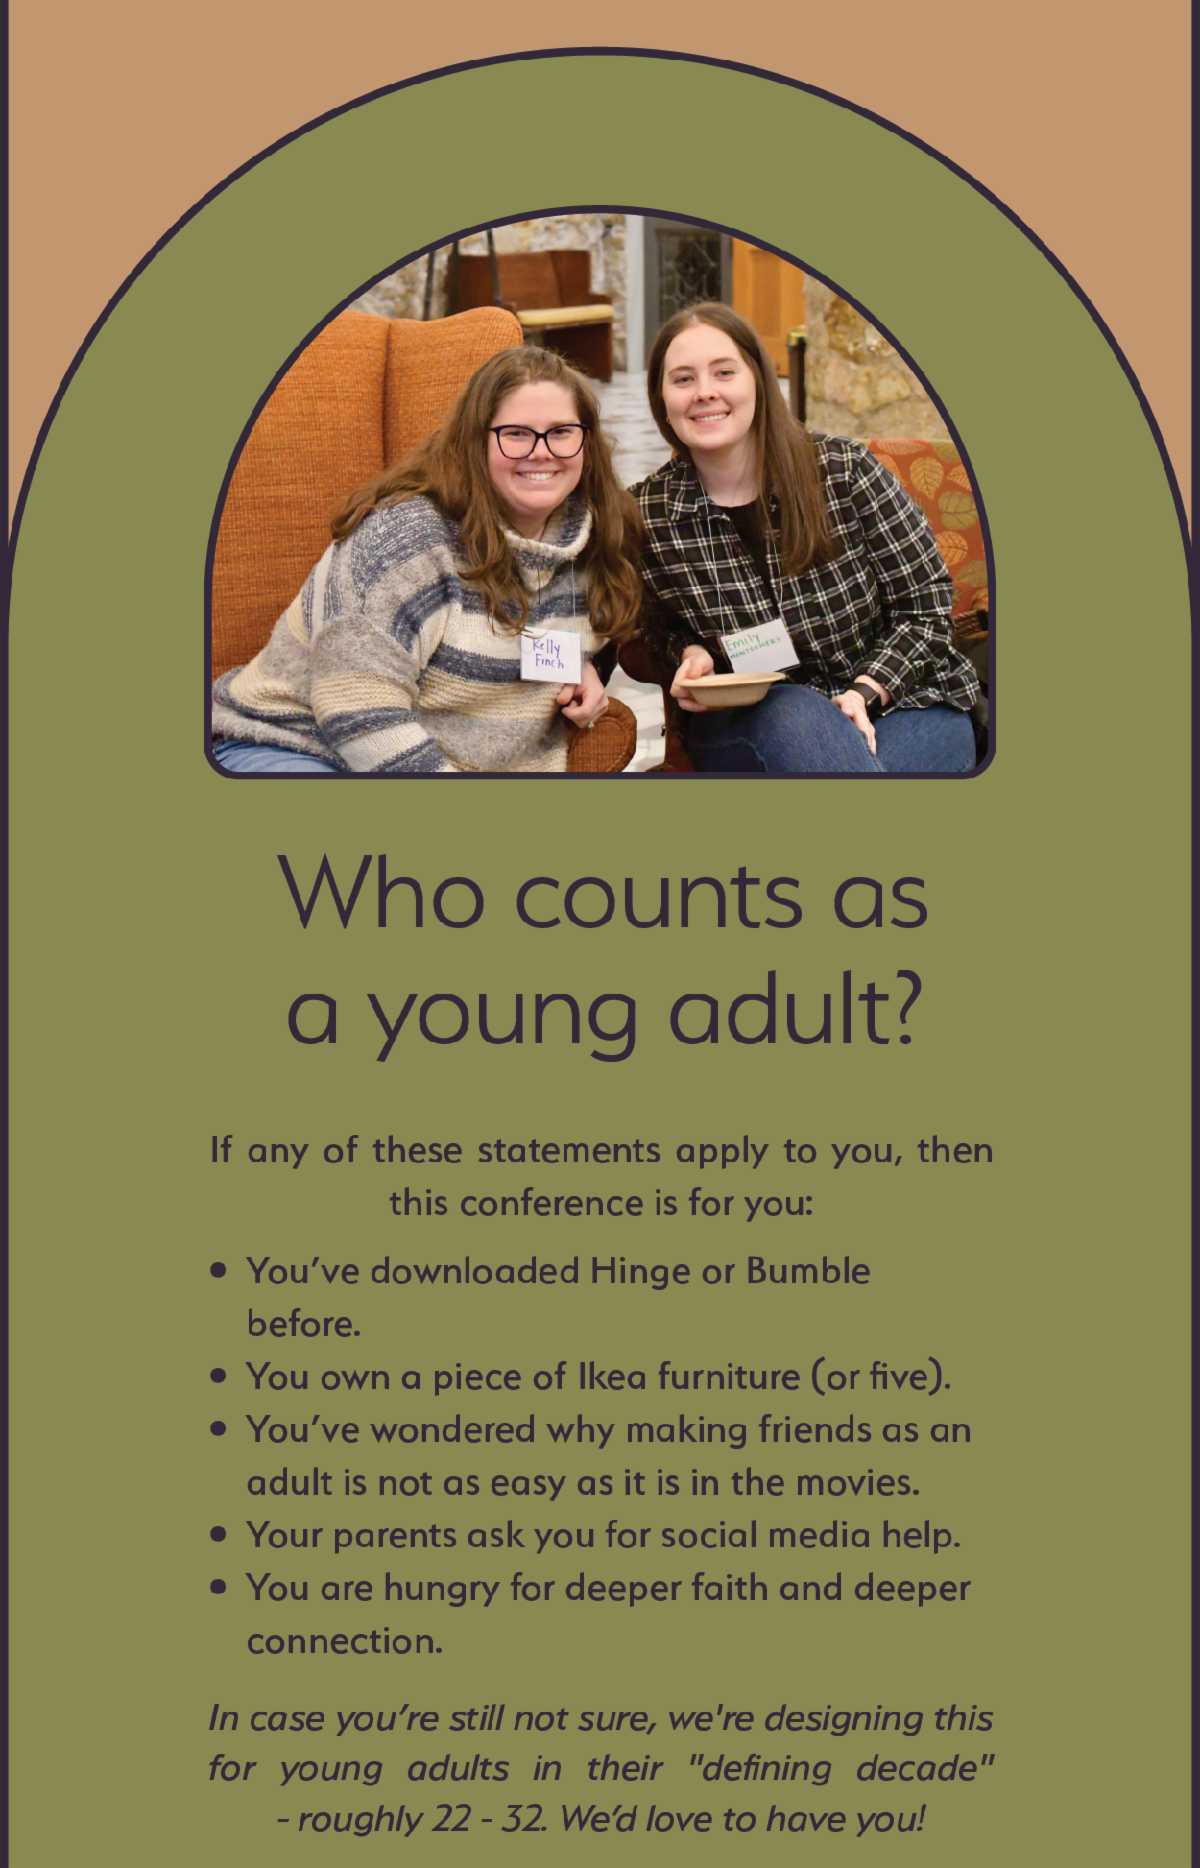 Who counts as a young adult? - If any of these statements apply to you, then this conference is for you: You’ve downloaded Hinge or Bumble  before.  You own a piece of Ikea furniture (or five).  You’ve wondered why making friends as an adult is not as easy as it is in the movies.  Your parents ask you for social media help.  You are hungry for deeper faith and deeper connection.  In case you’re still not sure, we're designing this for young adults in their "defining decade" - roughly 22 - 32. We’d love to have you!